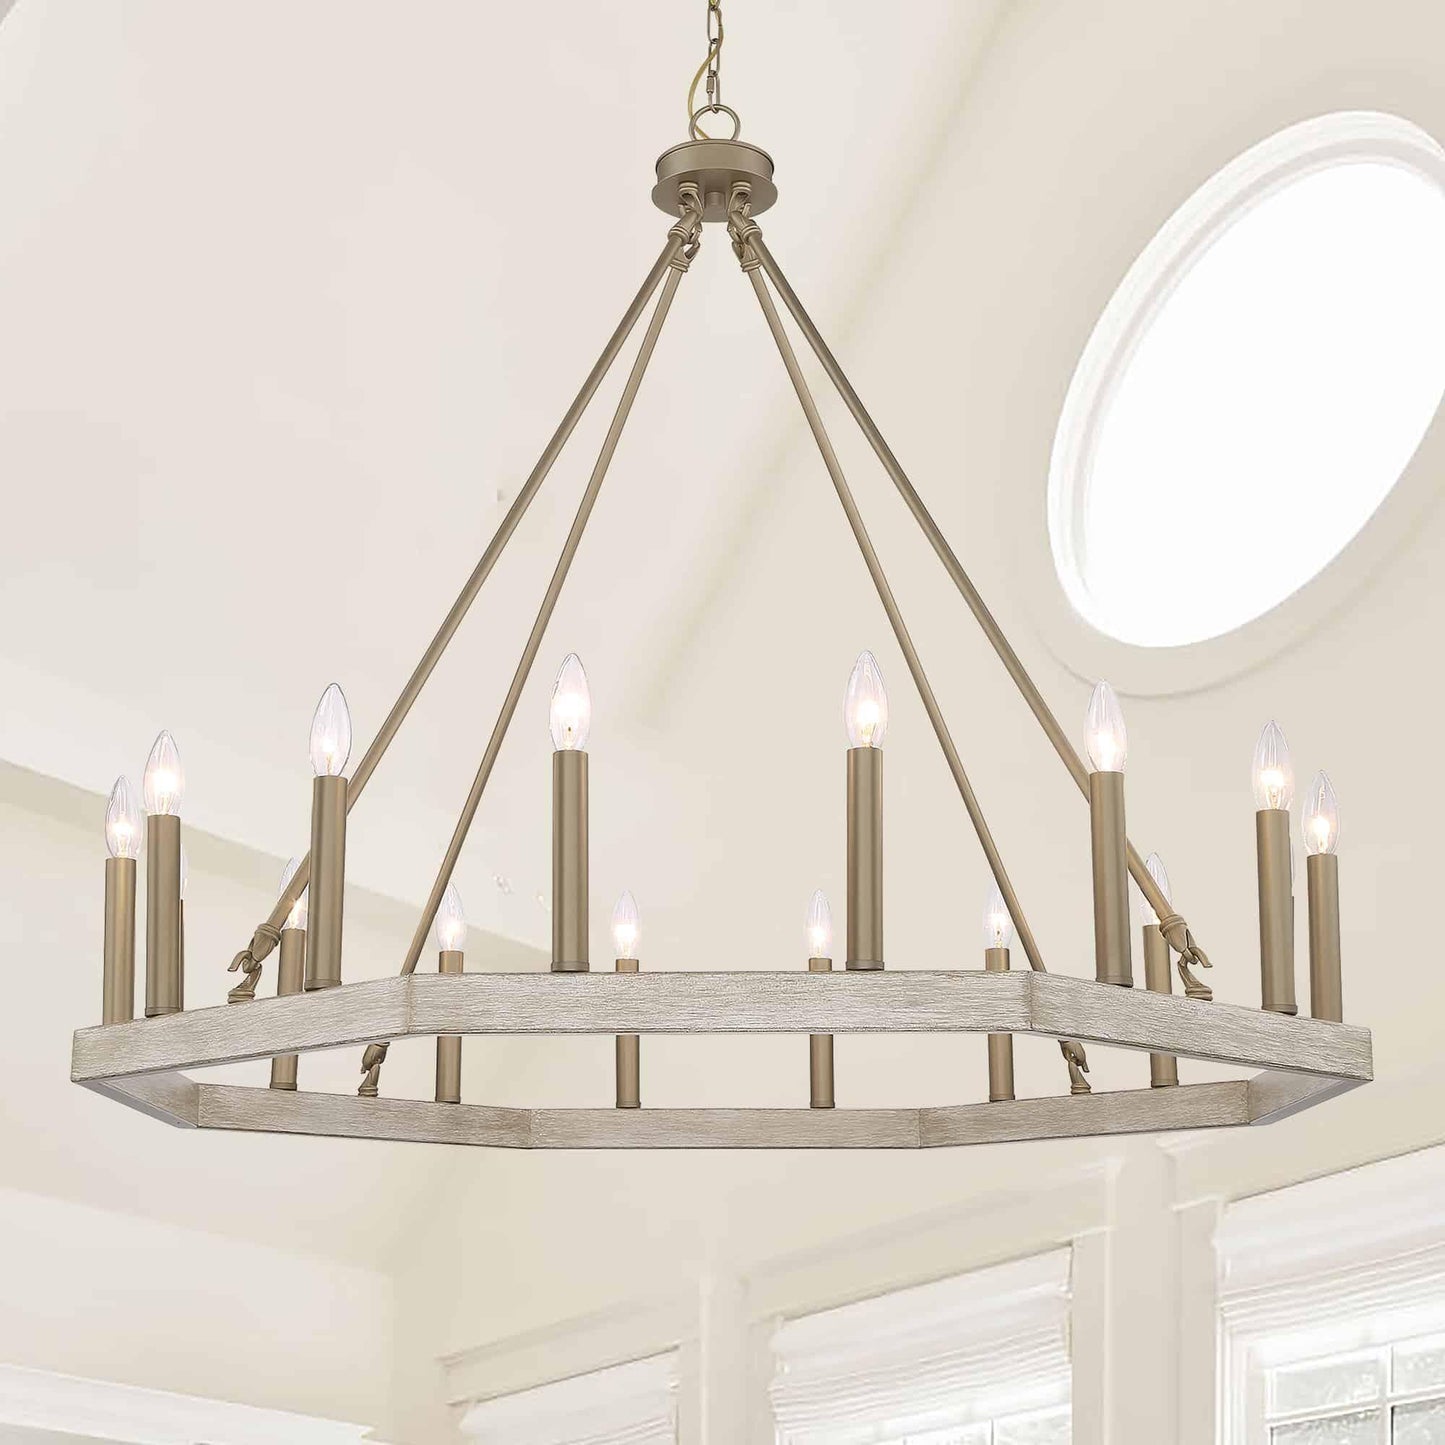 16 light candle style wagon wheel chandelier 1 (1) by ACROMA